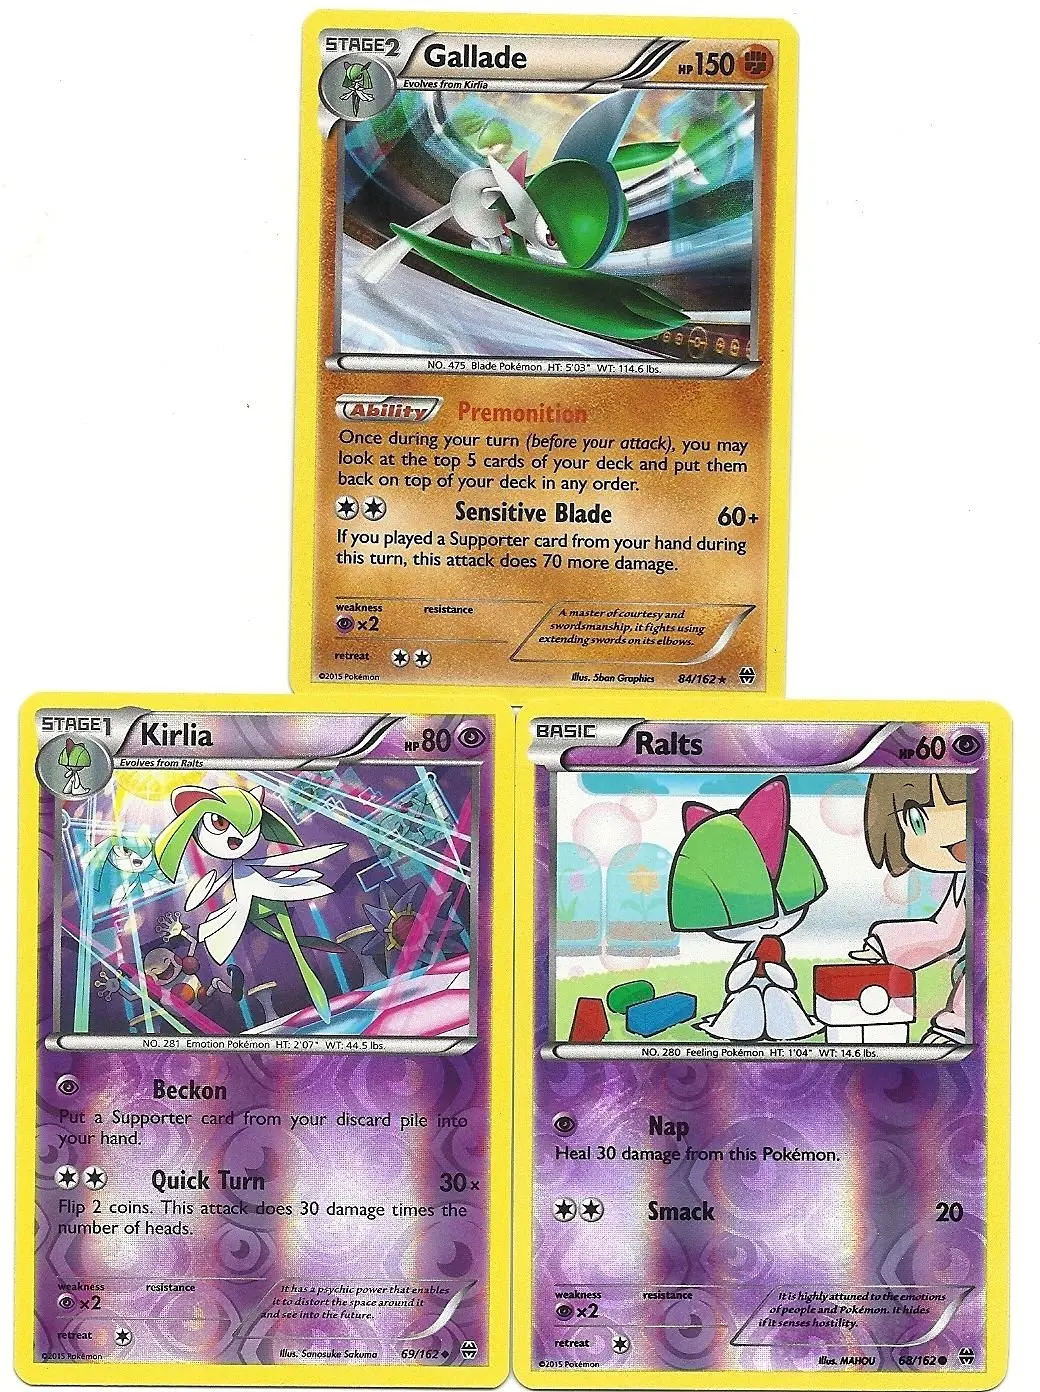 Buy Ship From Usa 3 Xy Breakthrough Evo Pokemon Cards Gallade Holo Kirlia Rh Ralts Rh Item H3ng Ue Ew23d In Cheap Price On Alibaba Com